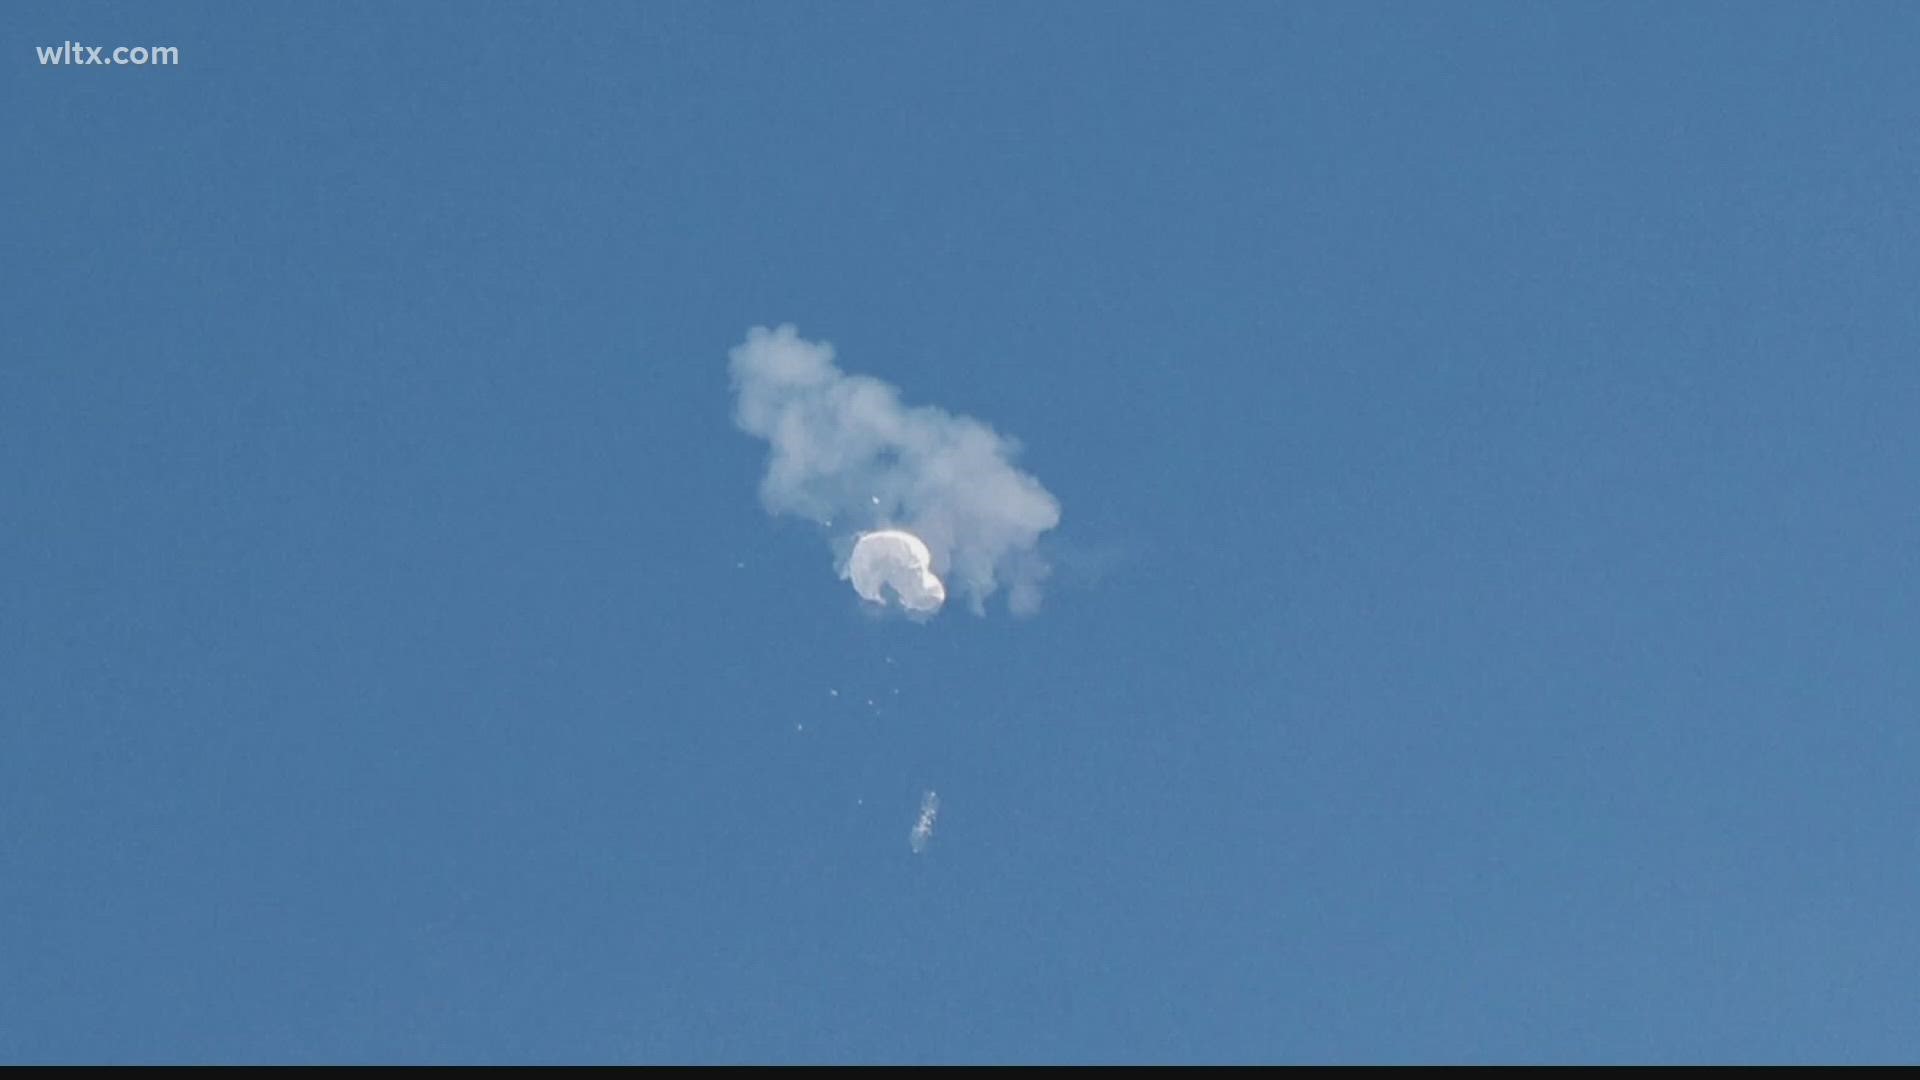 The U.S. military on Saturday shot down a suspected Chinese spy balloon off the Carolina coast after it traversed sensitive military sites across North America.